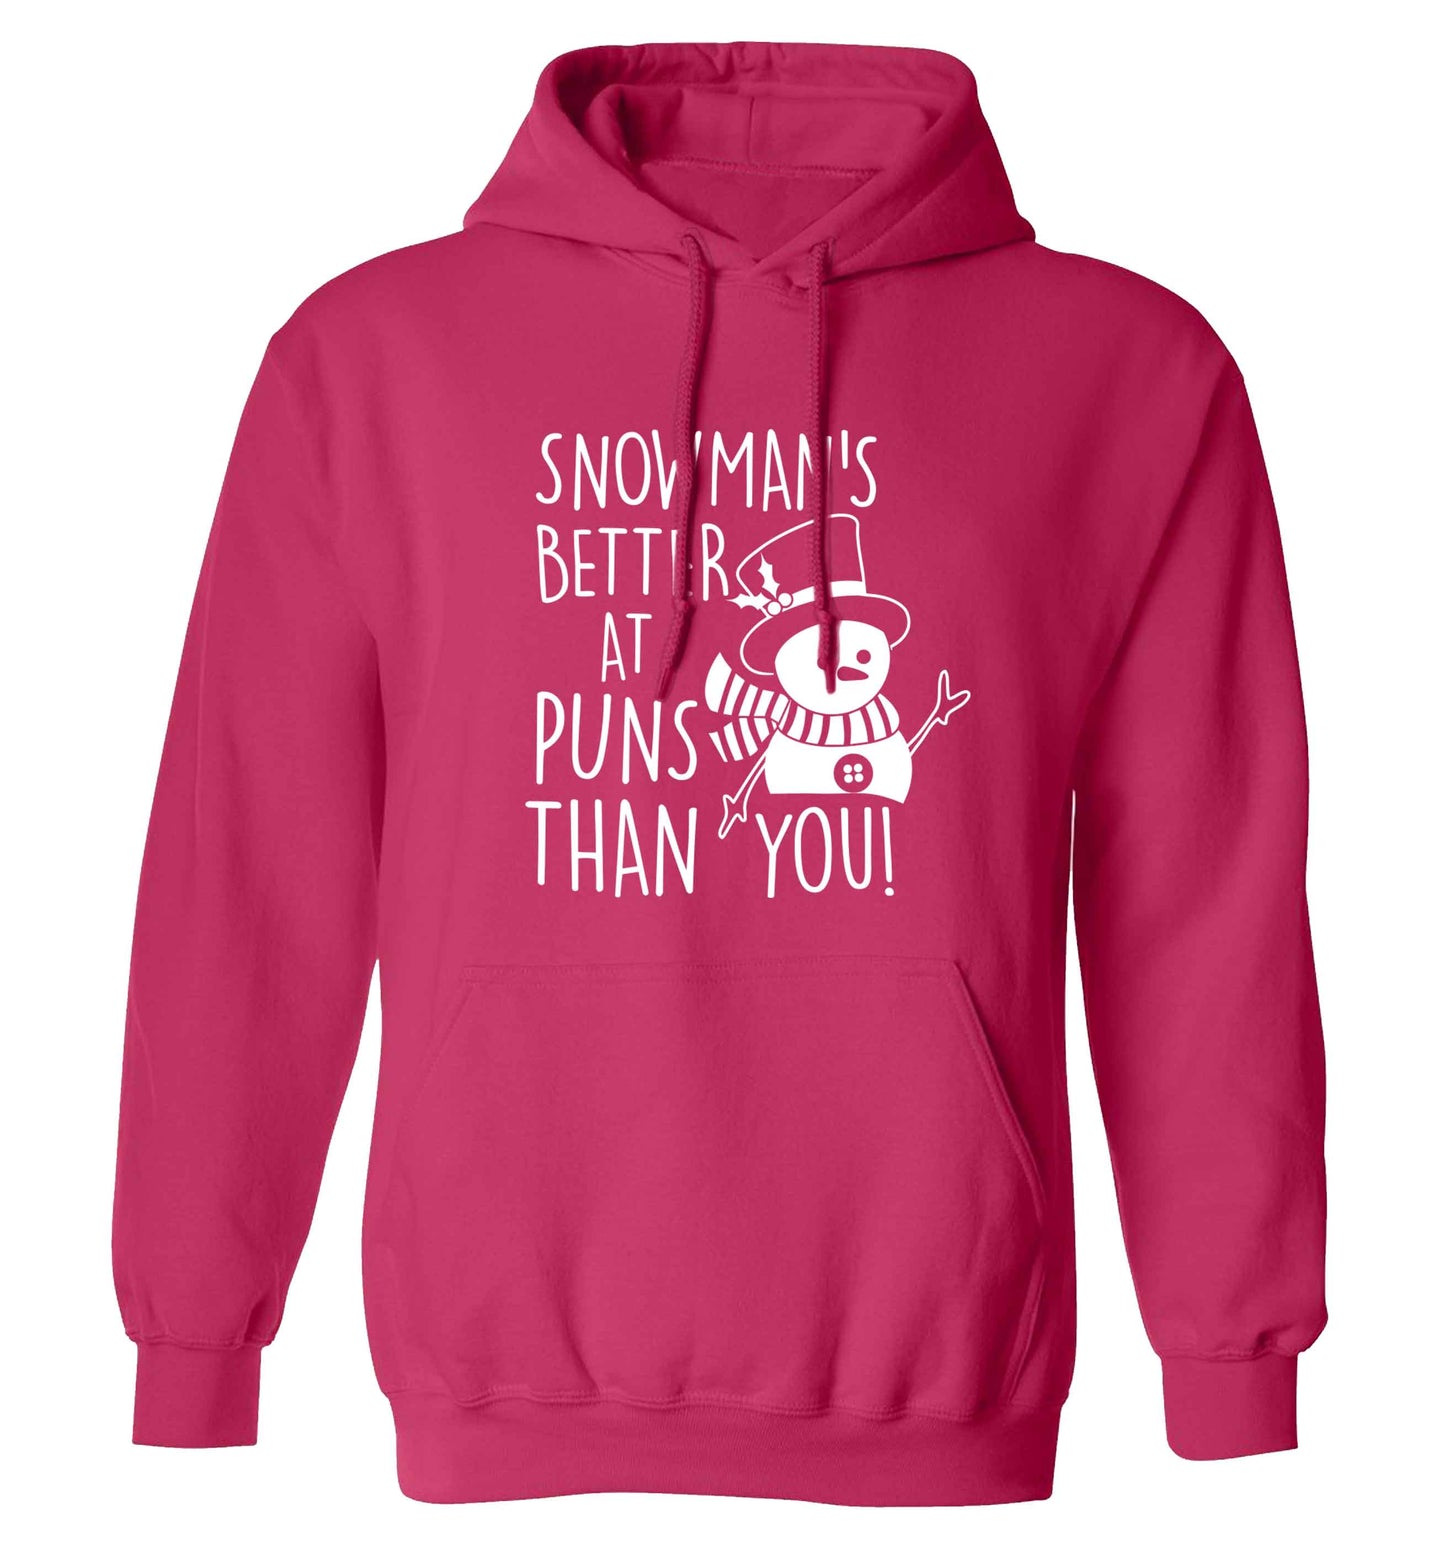 Snowman's Puns You adults unisex pink hoodie 2XL